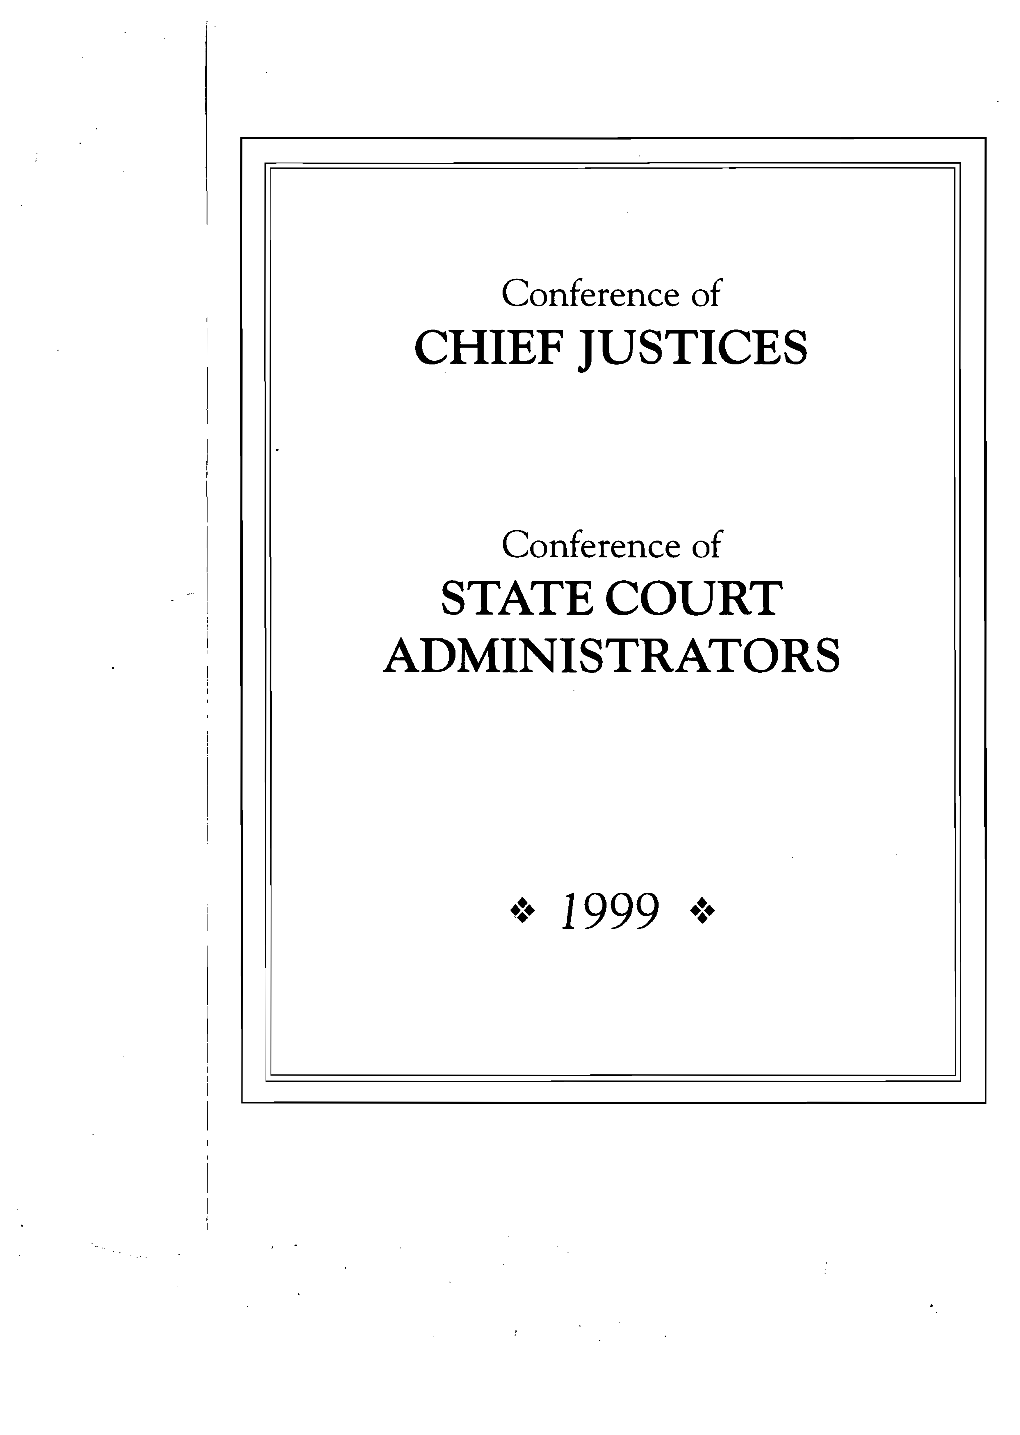 Chief Justices State Court Administrators